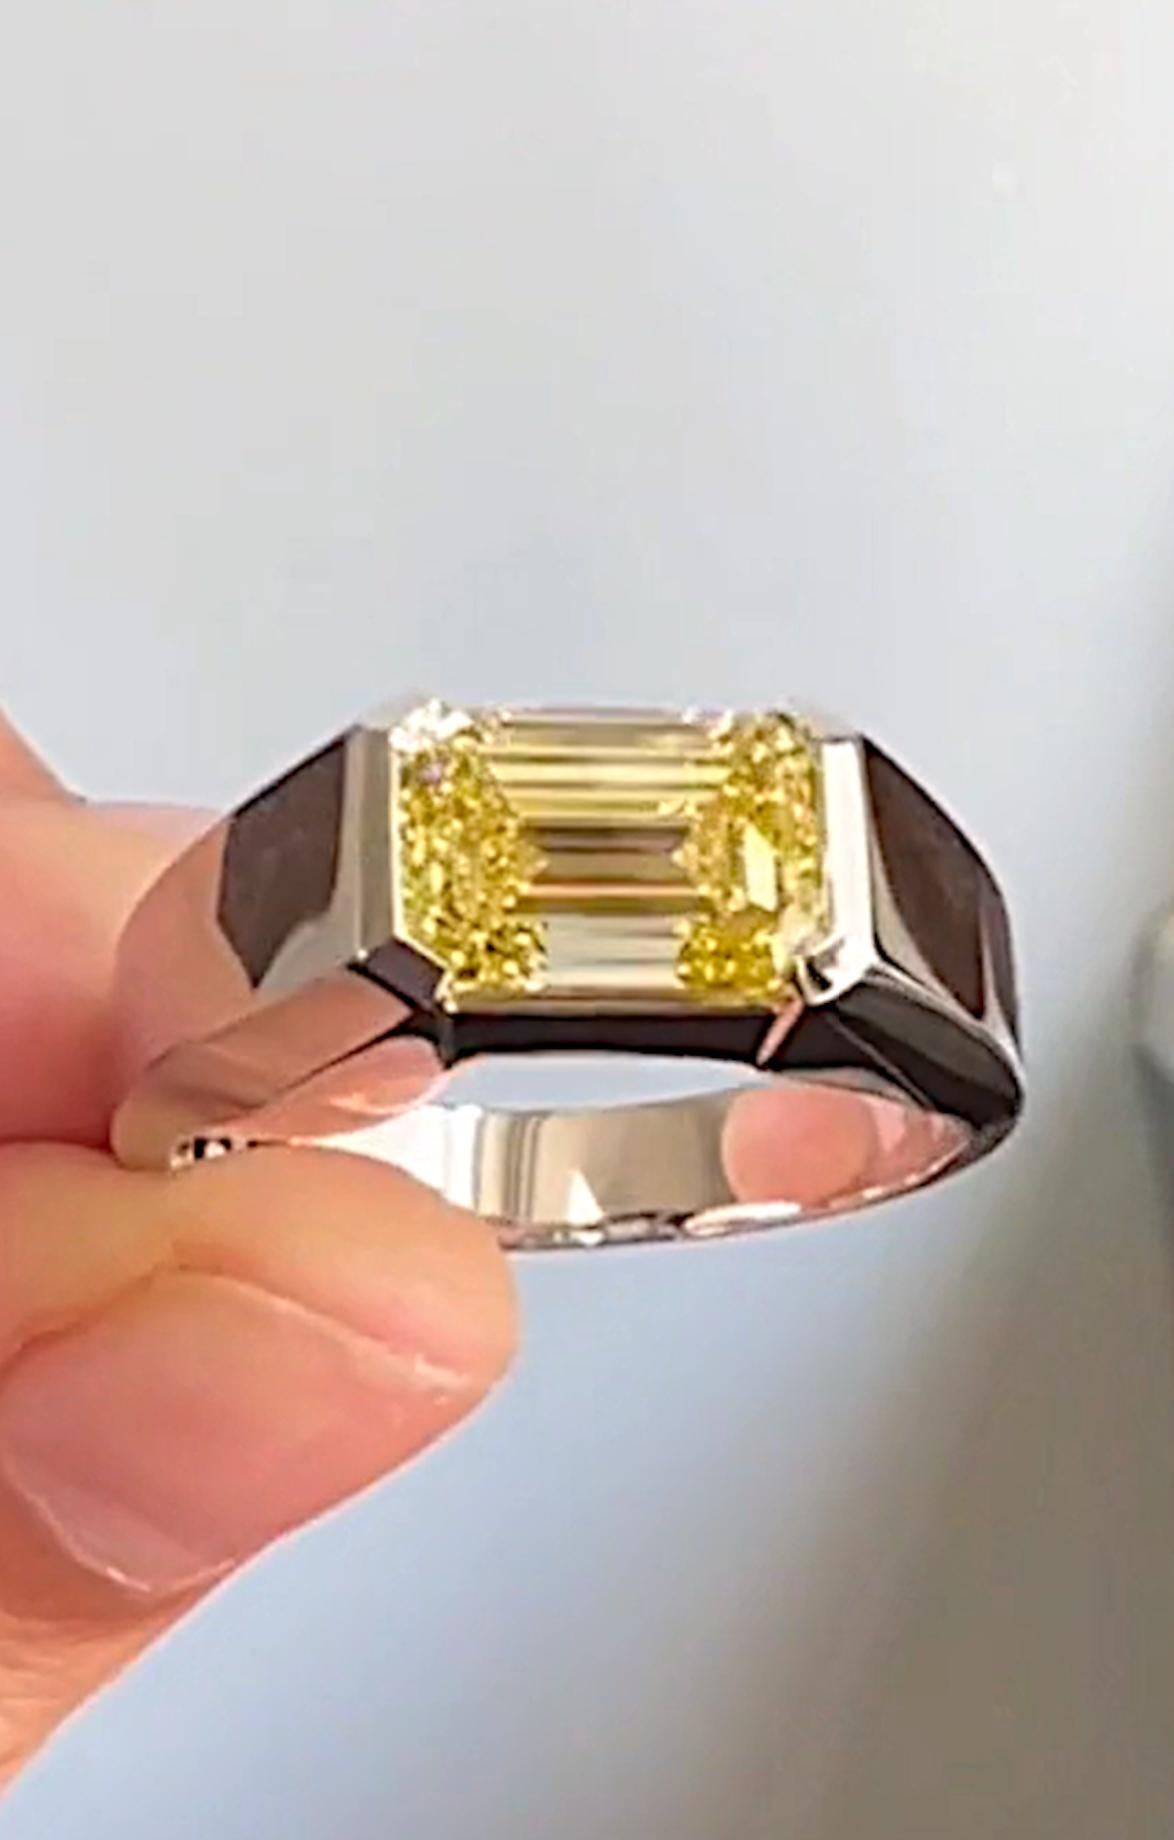 An exquisite emerald cut diamond mounted in solid platinum 
the main stone weight is 3 carats



